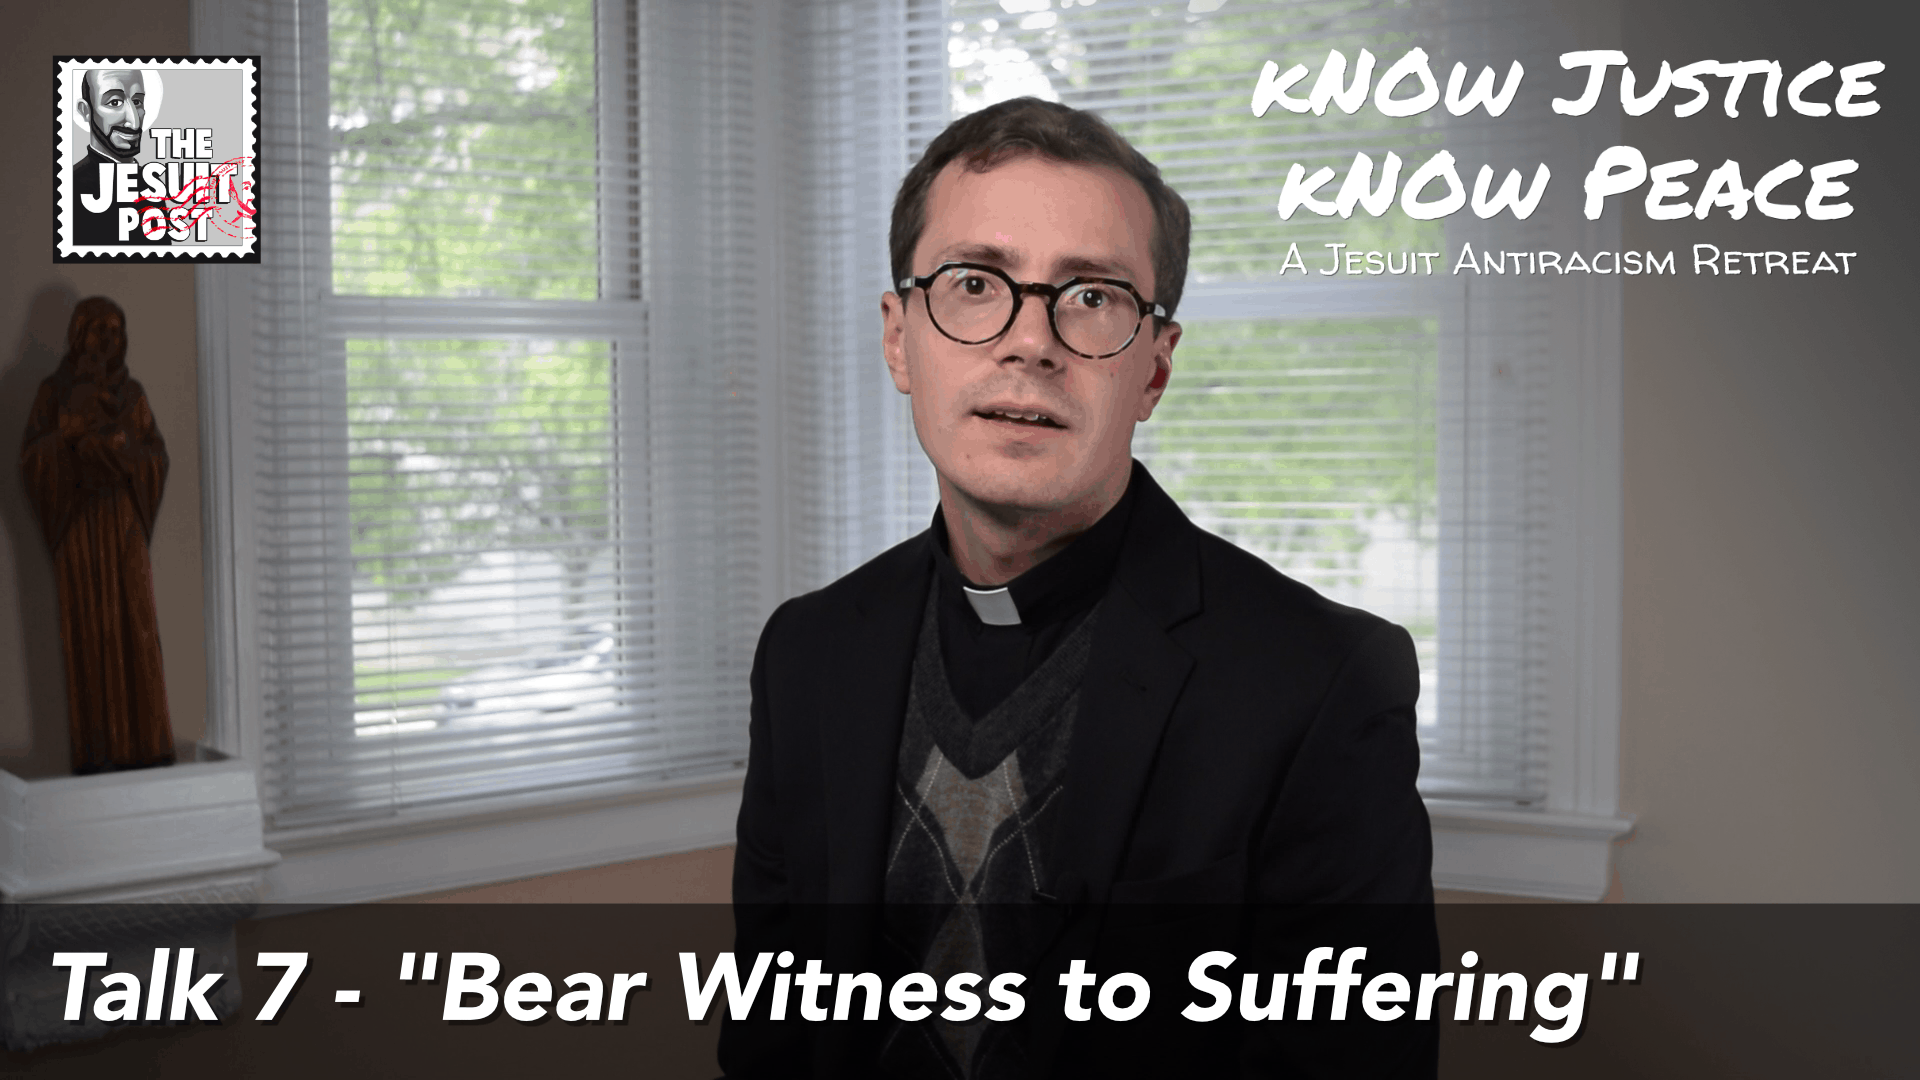 Bear Witness to Suffering | Know Justice, Know Peace: A Jesuit Antiracism Retreat